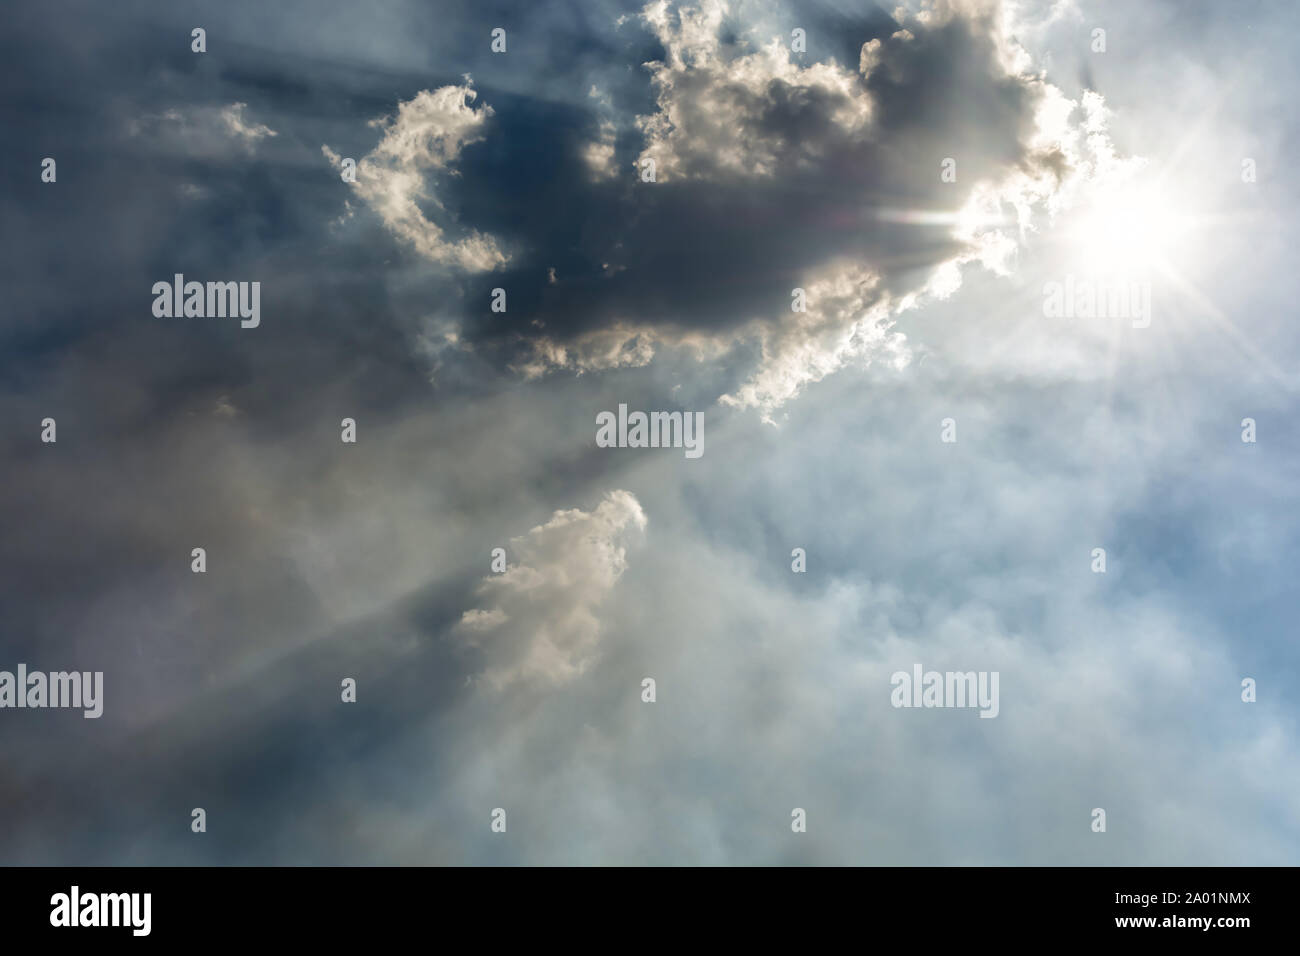 Sunshine clouded by clouds and smog Stock Photo